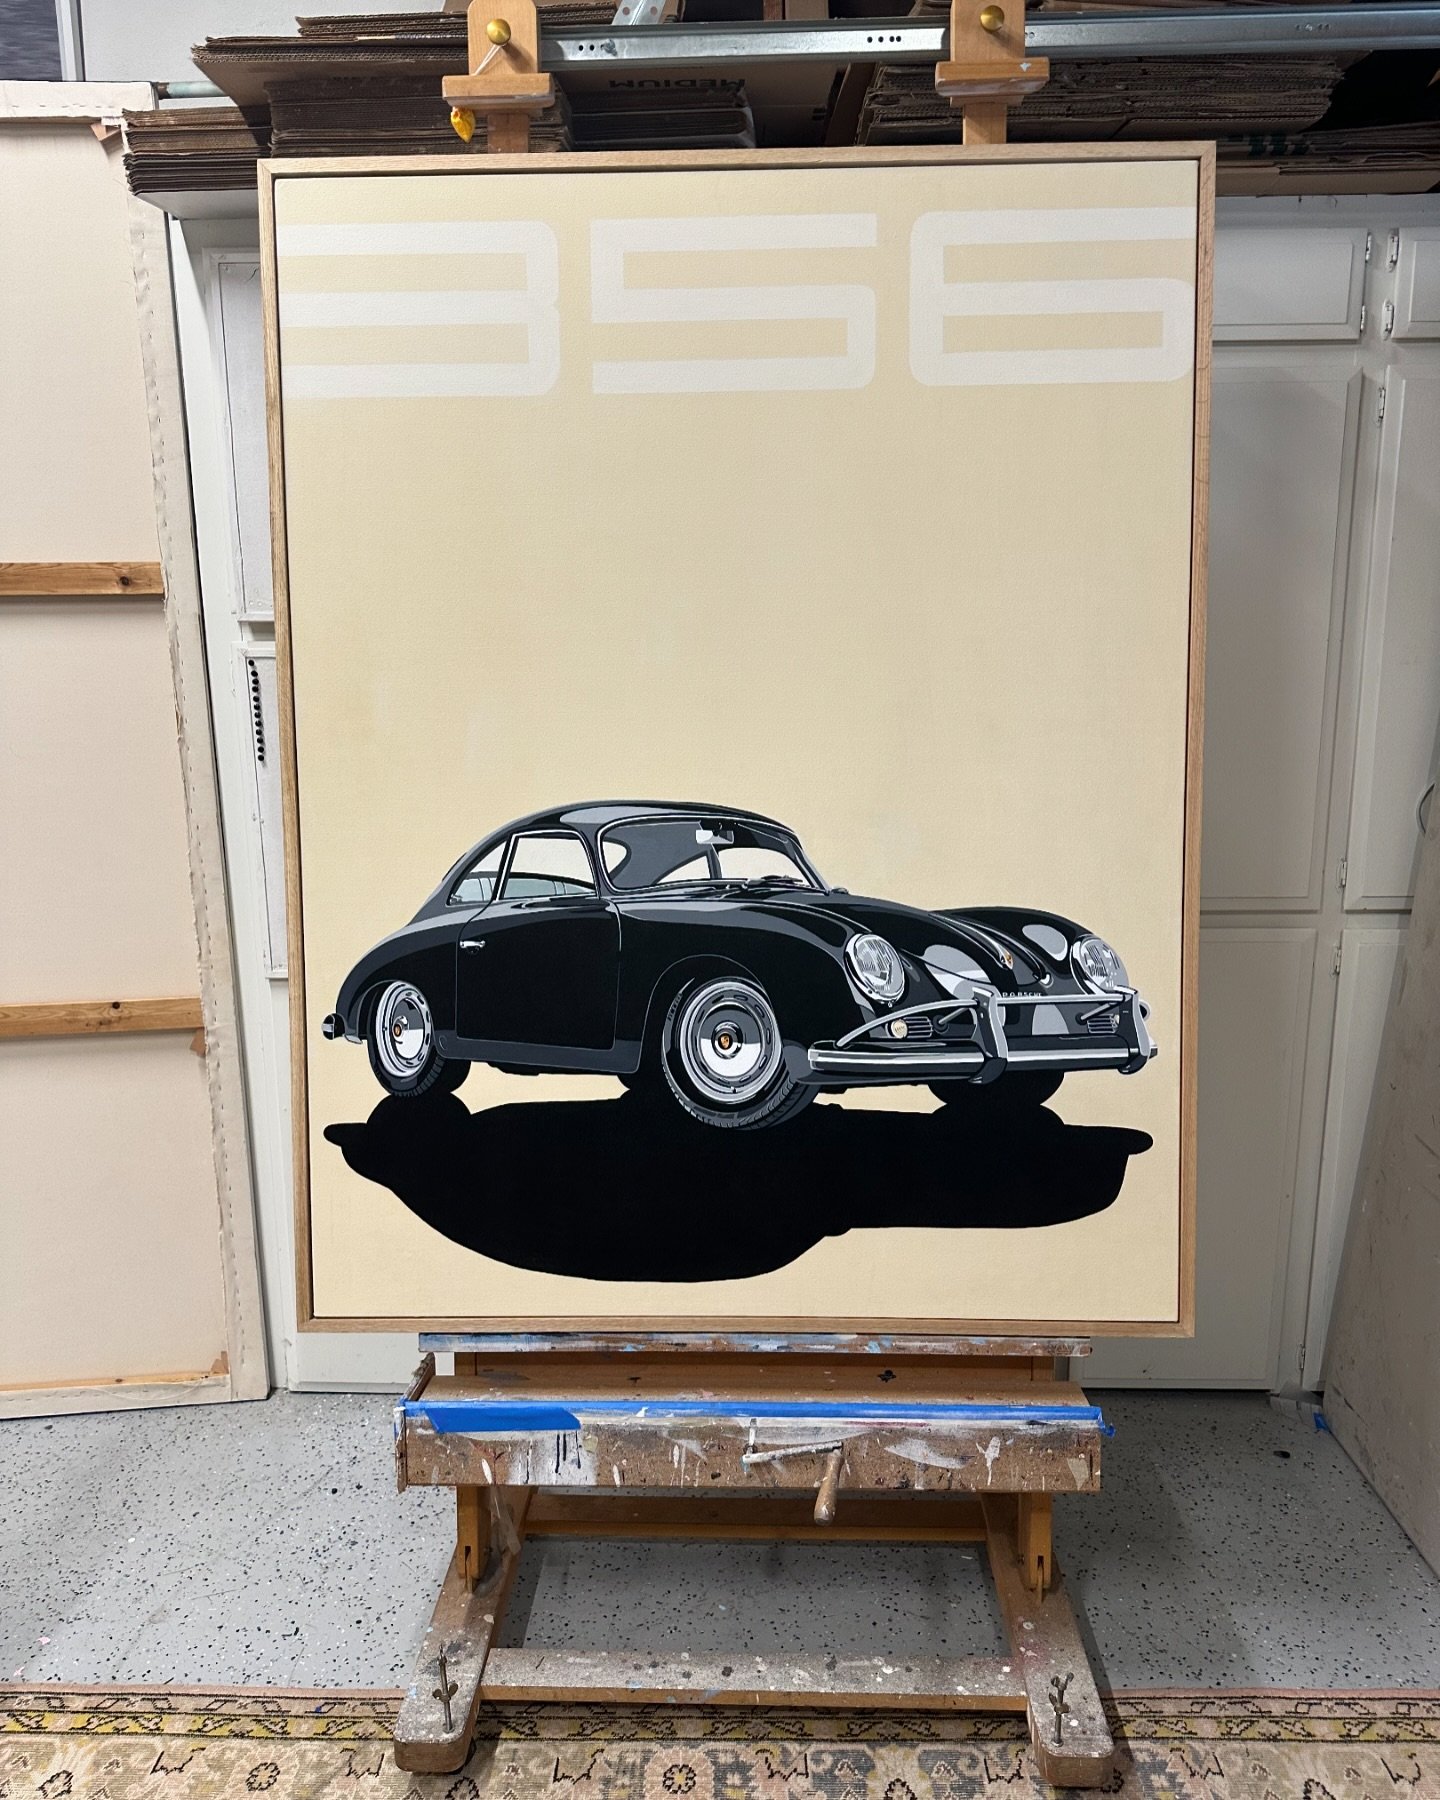 There is a new 356 Super Coupe offered at Art Market San Francisco by Tim Yarger Fine Art - booth B11 25-28th April.